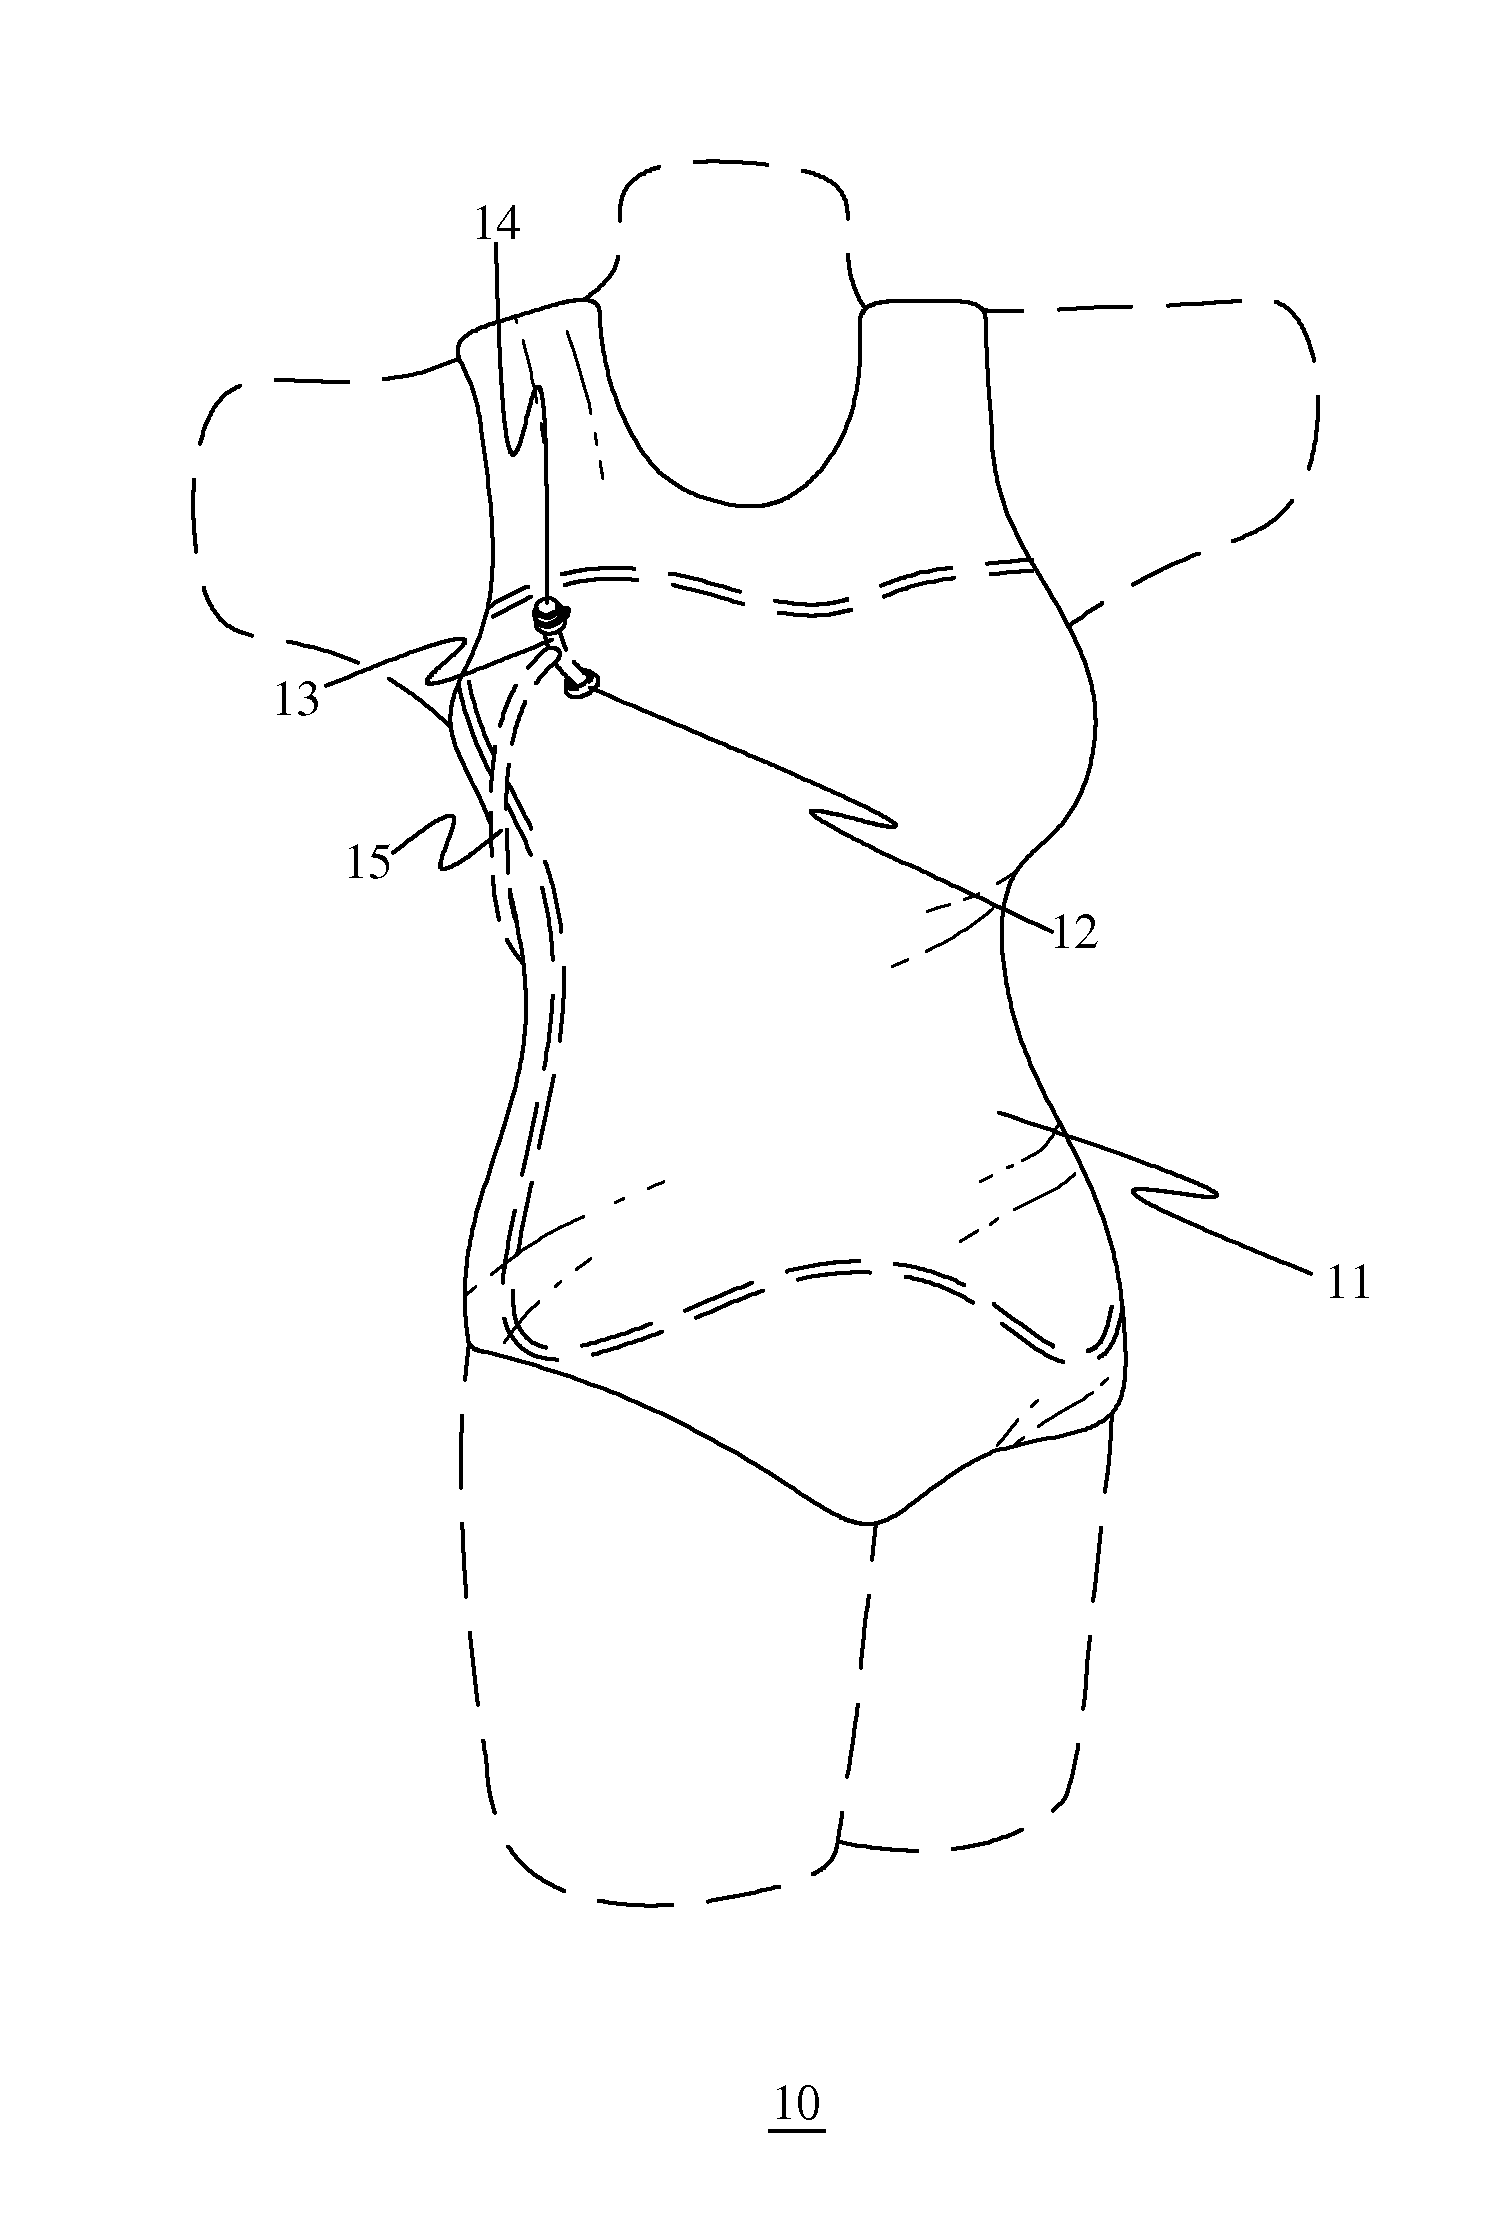 Swimsuit with lifesaving device